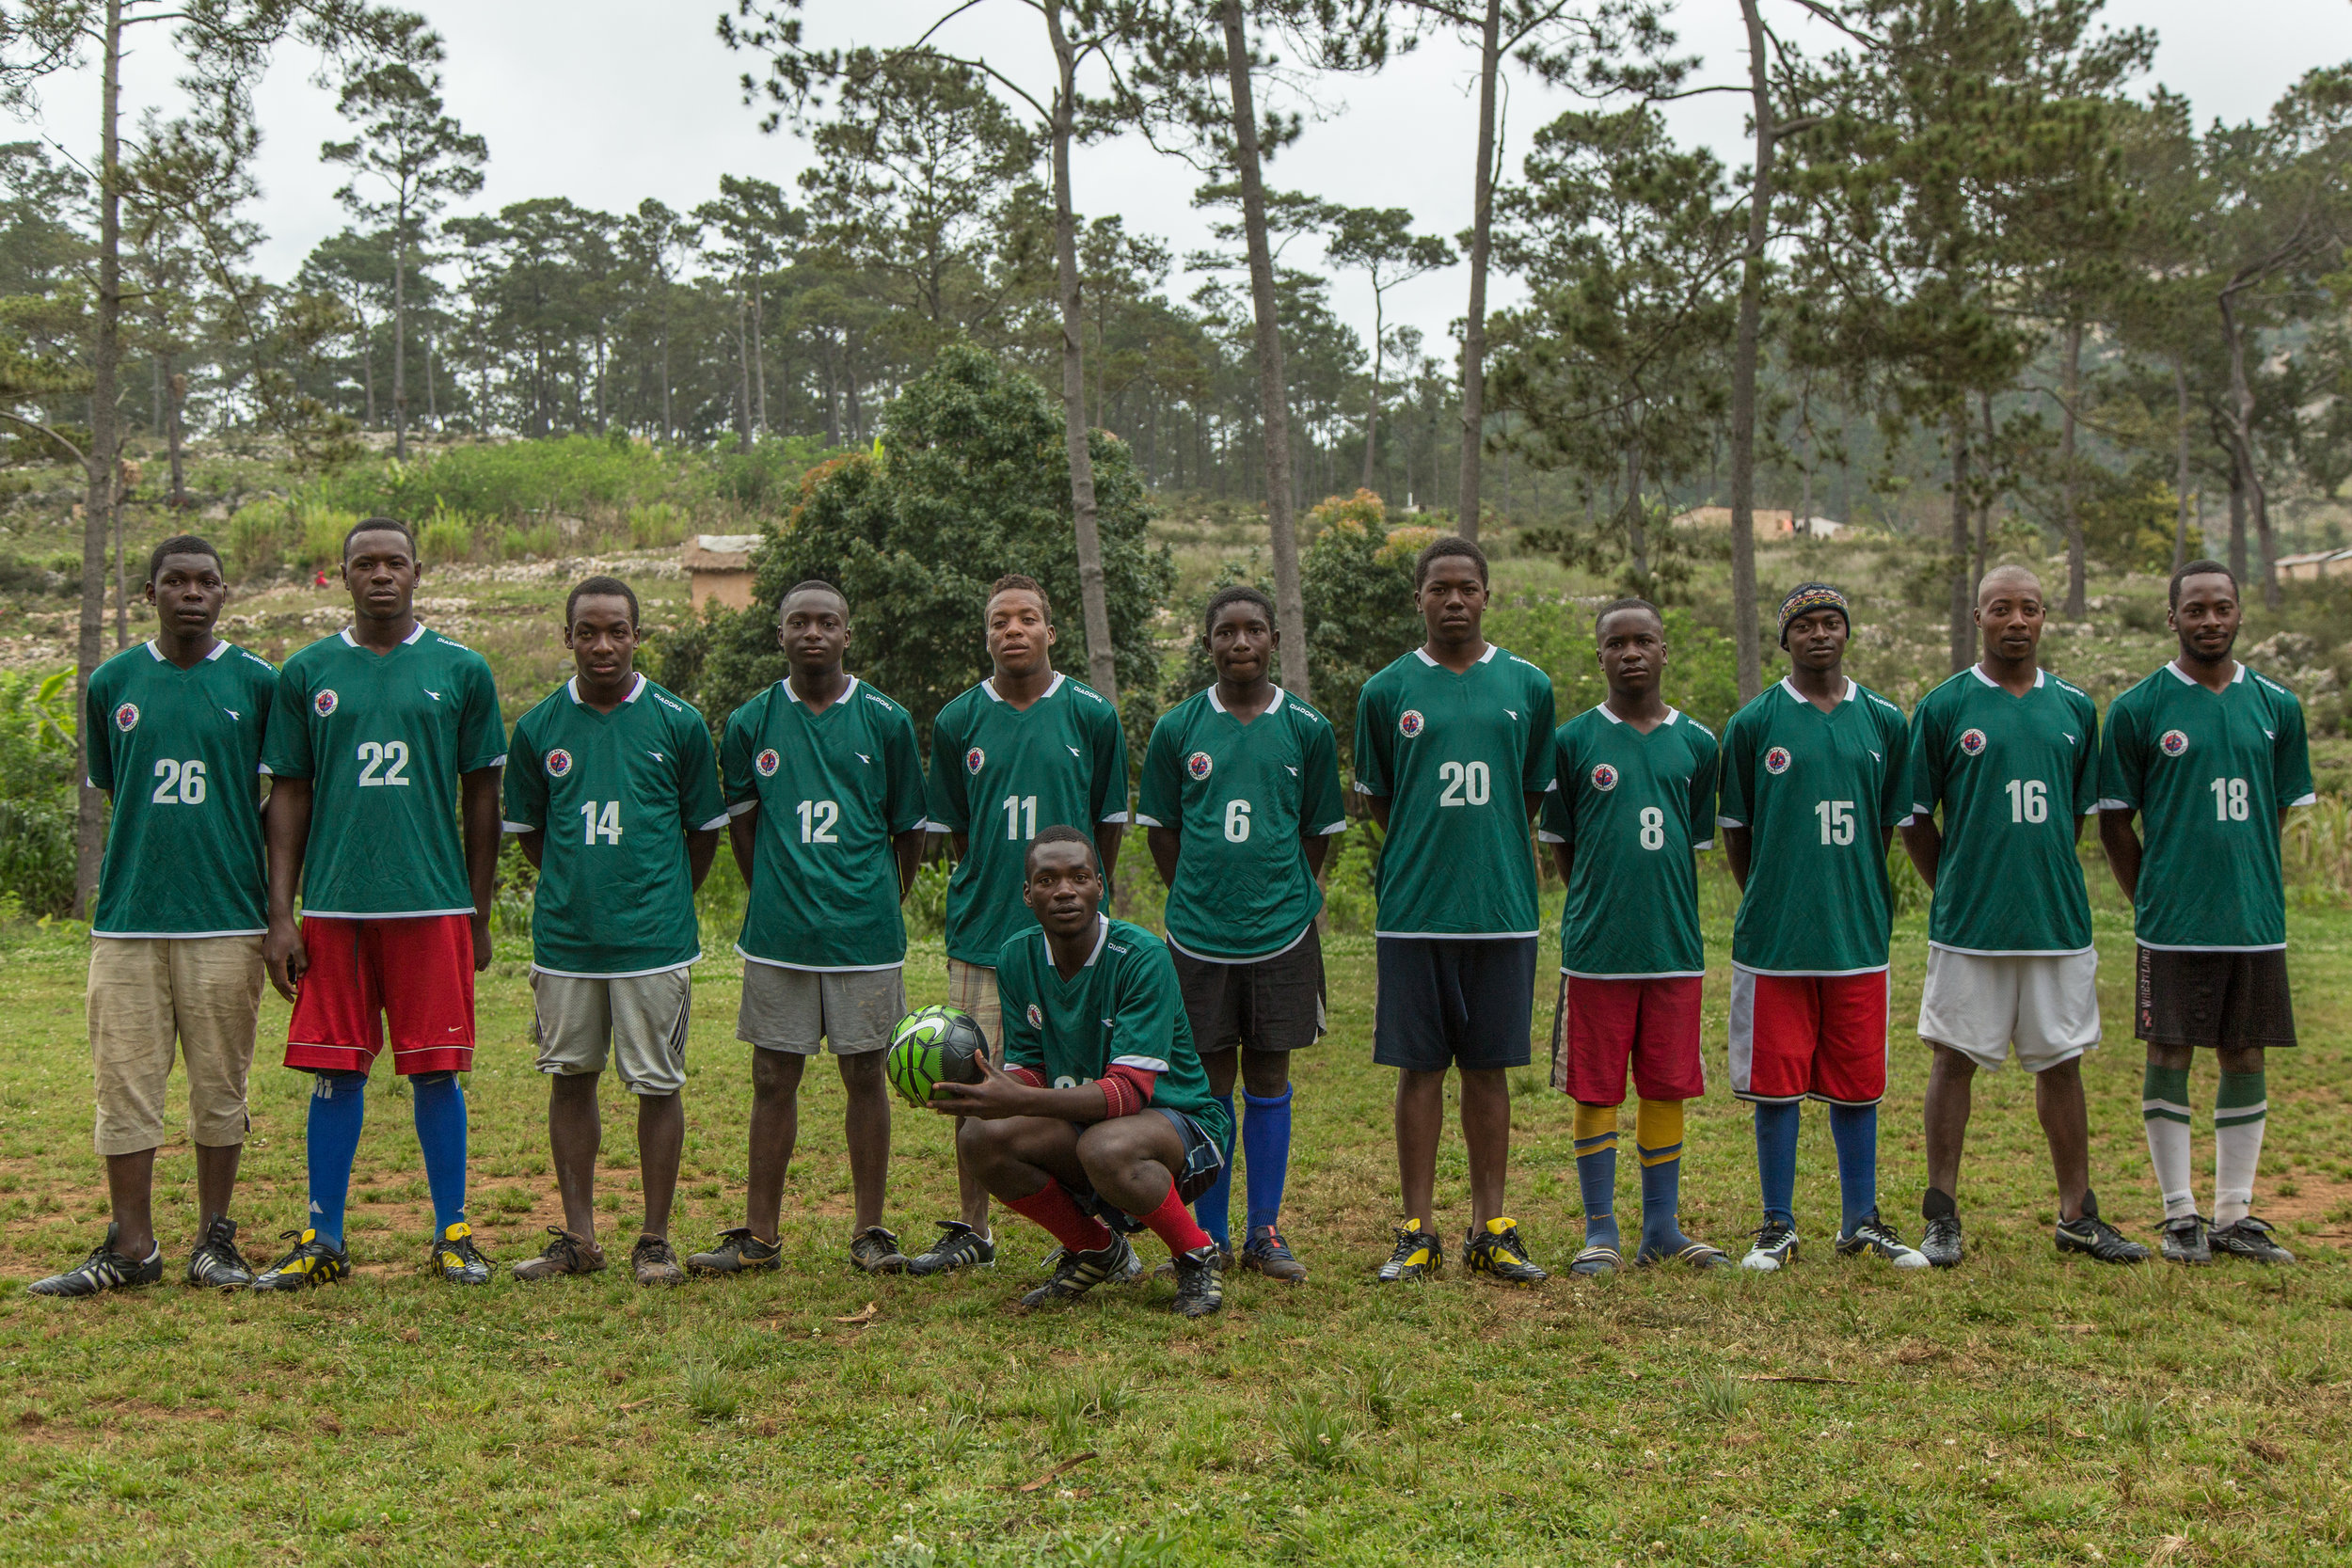 The Boukan Chat soccer team now called the Diablotins in their new kits. Soccer is a huge part of the way the world celebrates life and connects village to village. We love soccer and wanted to support the team. Now the Diablotin’s include a men’s a…